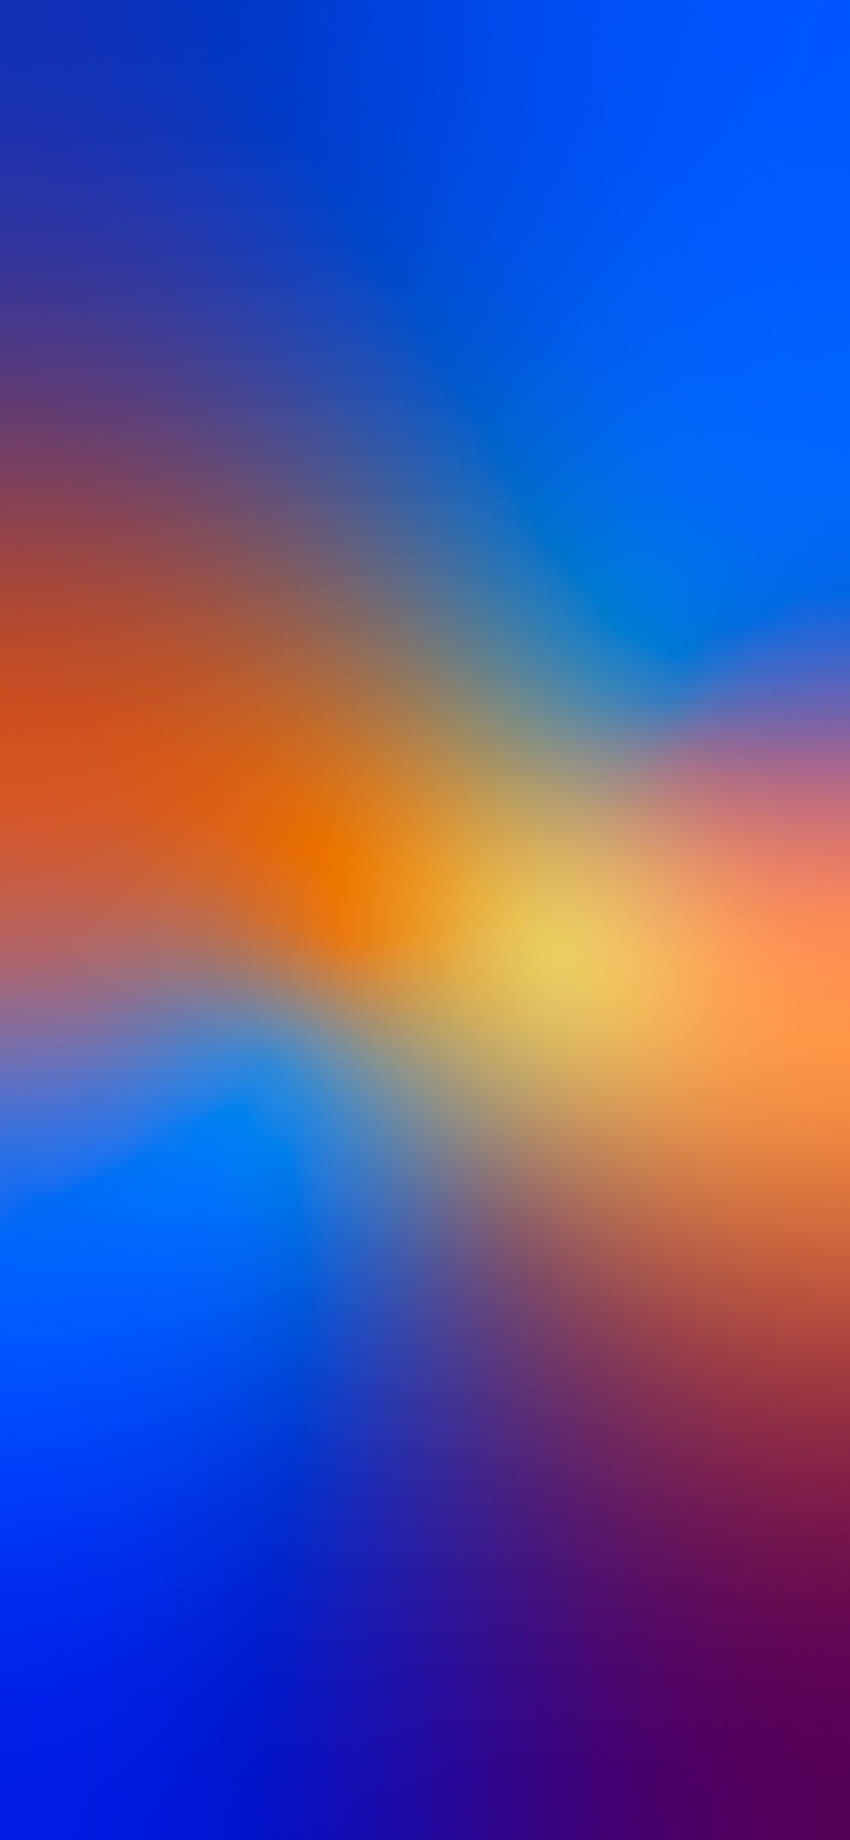 Blue to Orange gradient for iPhone on Twitter. Apple iphone , iphone ...